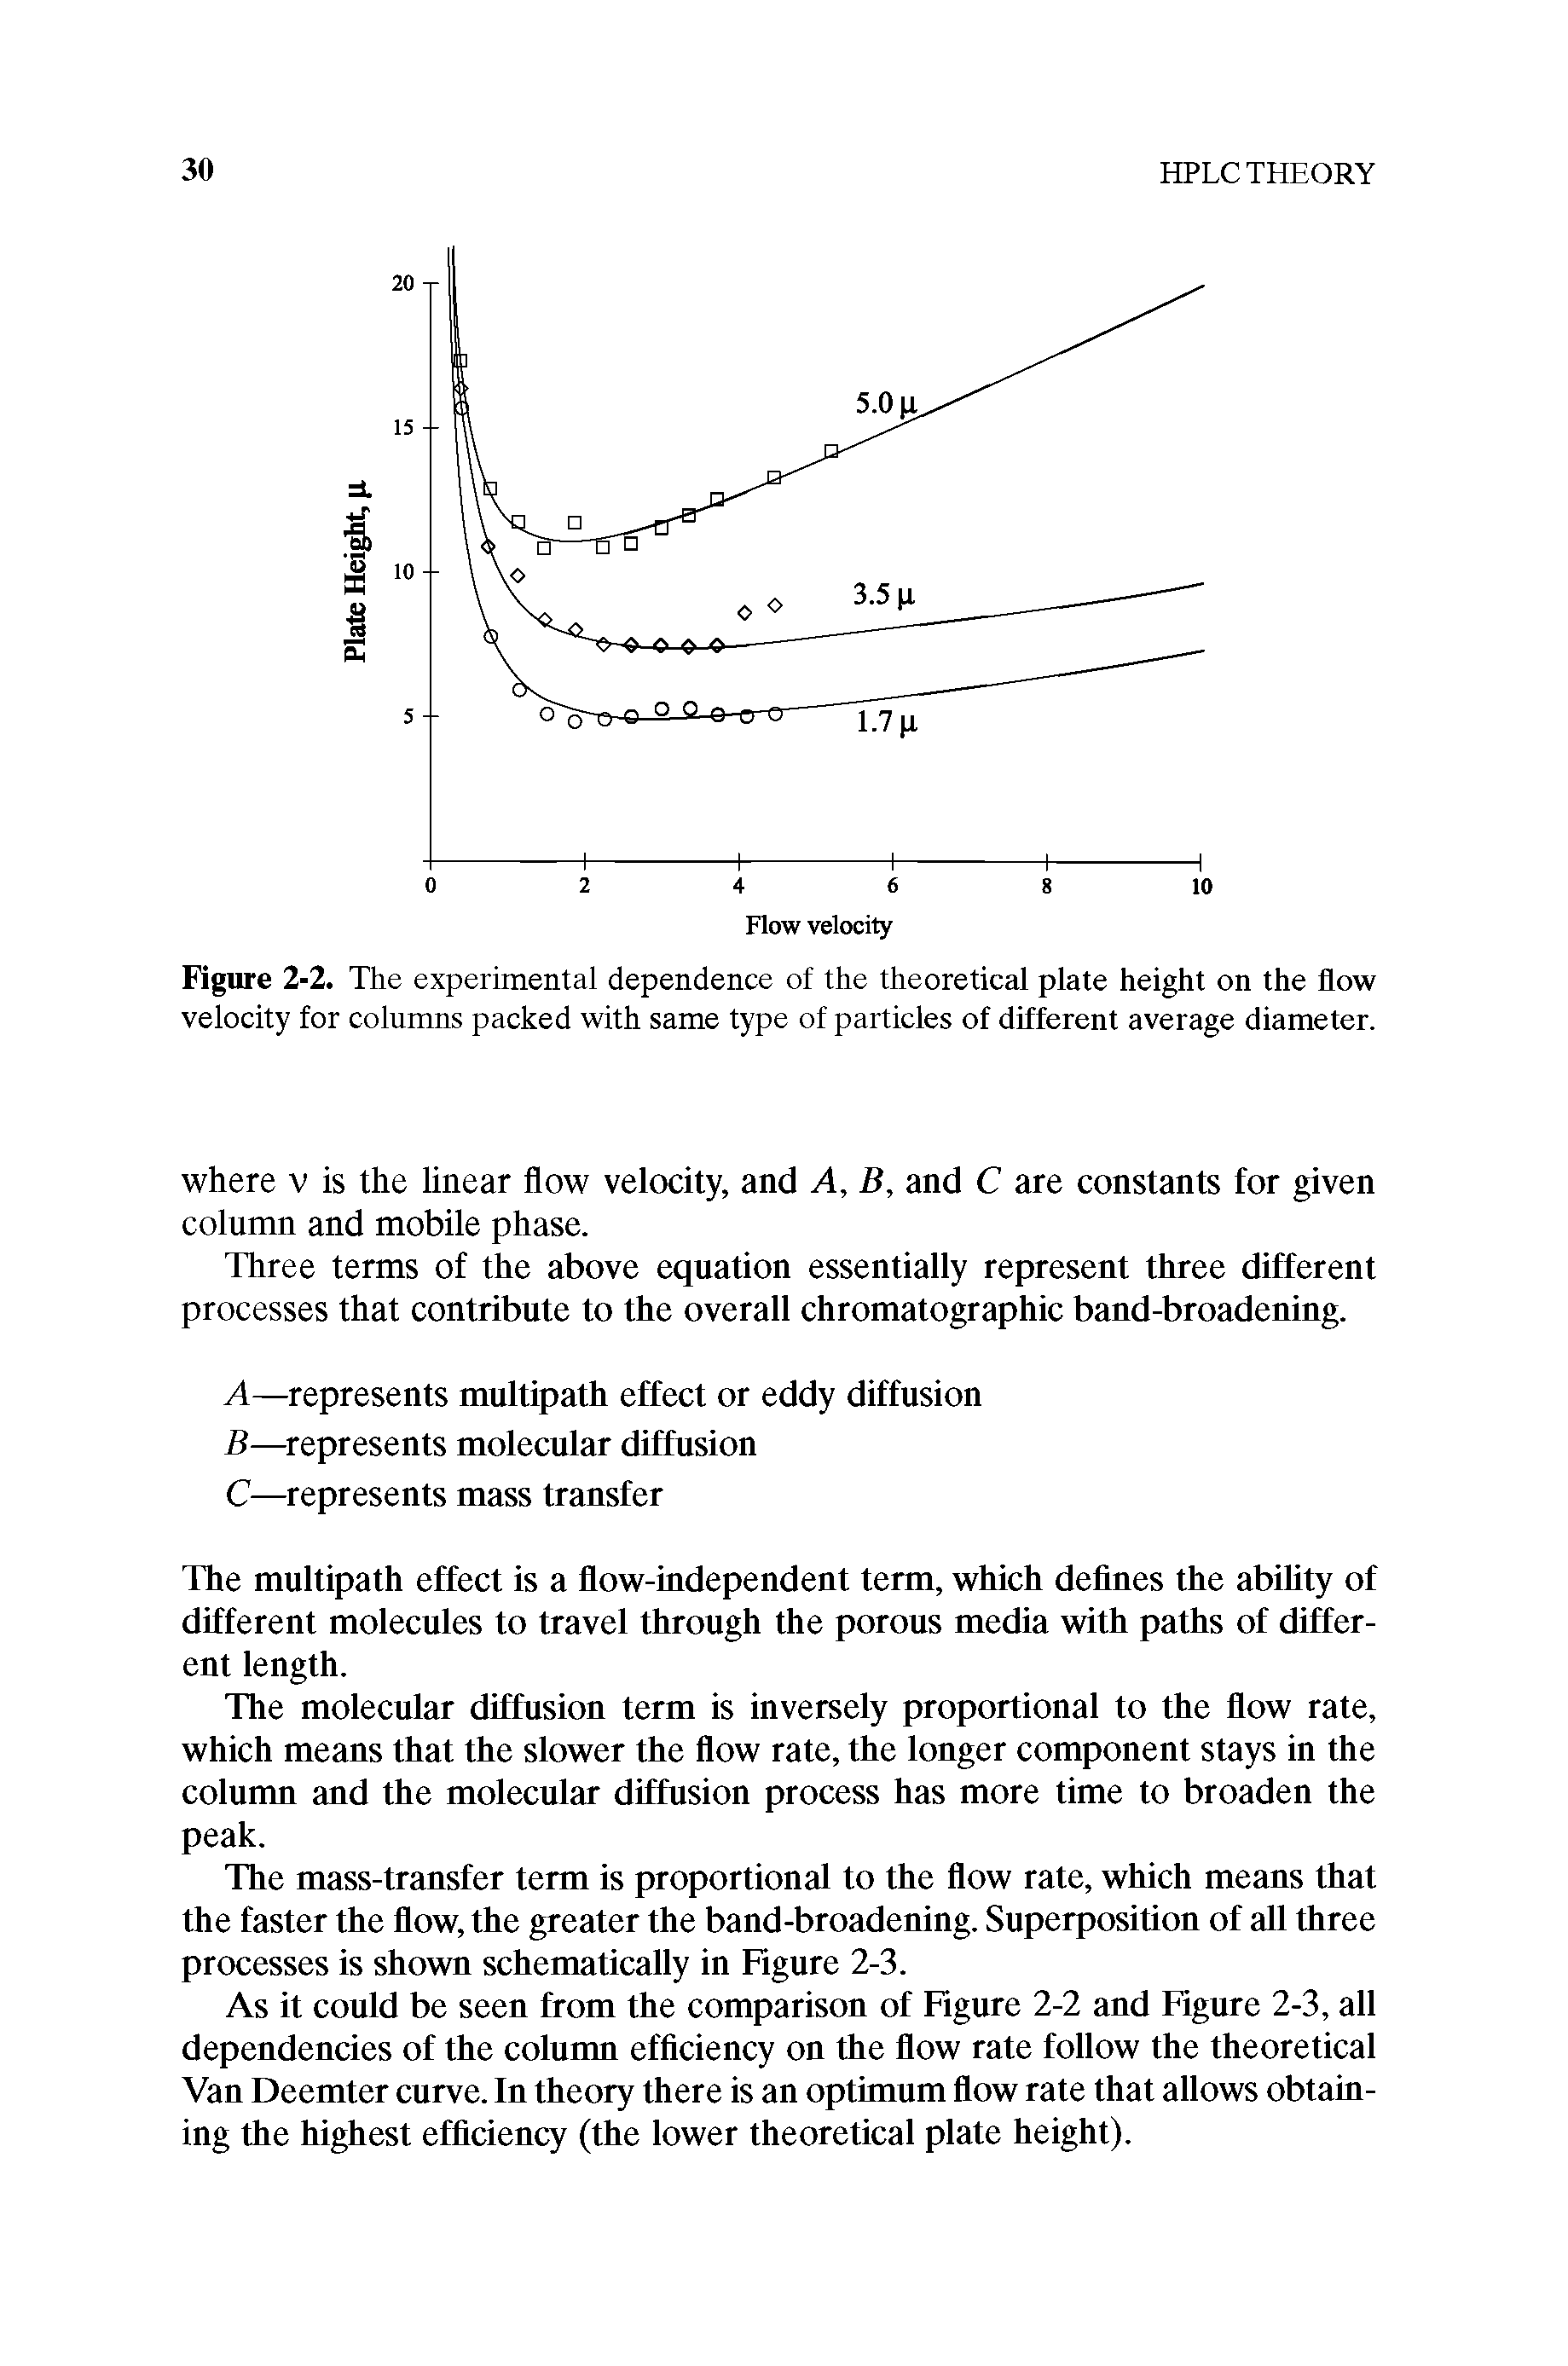 Figure 2-2. The experimental dependence of the theoretical plate height on the flow velocity for columns packed with same type of particles of different average diameter.